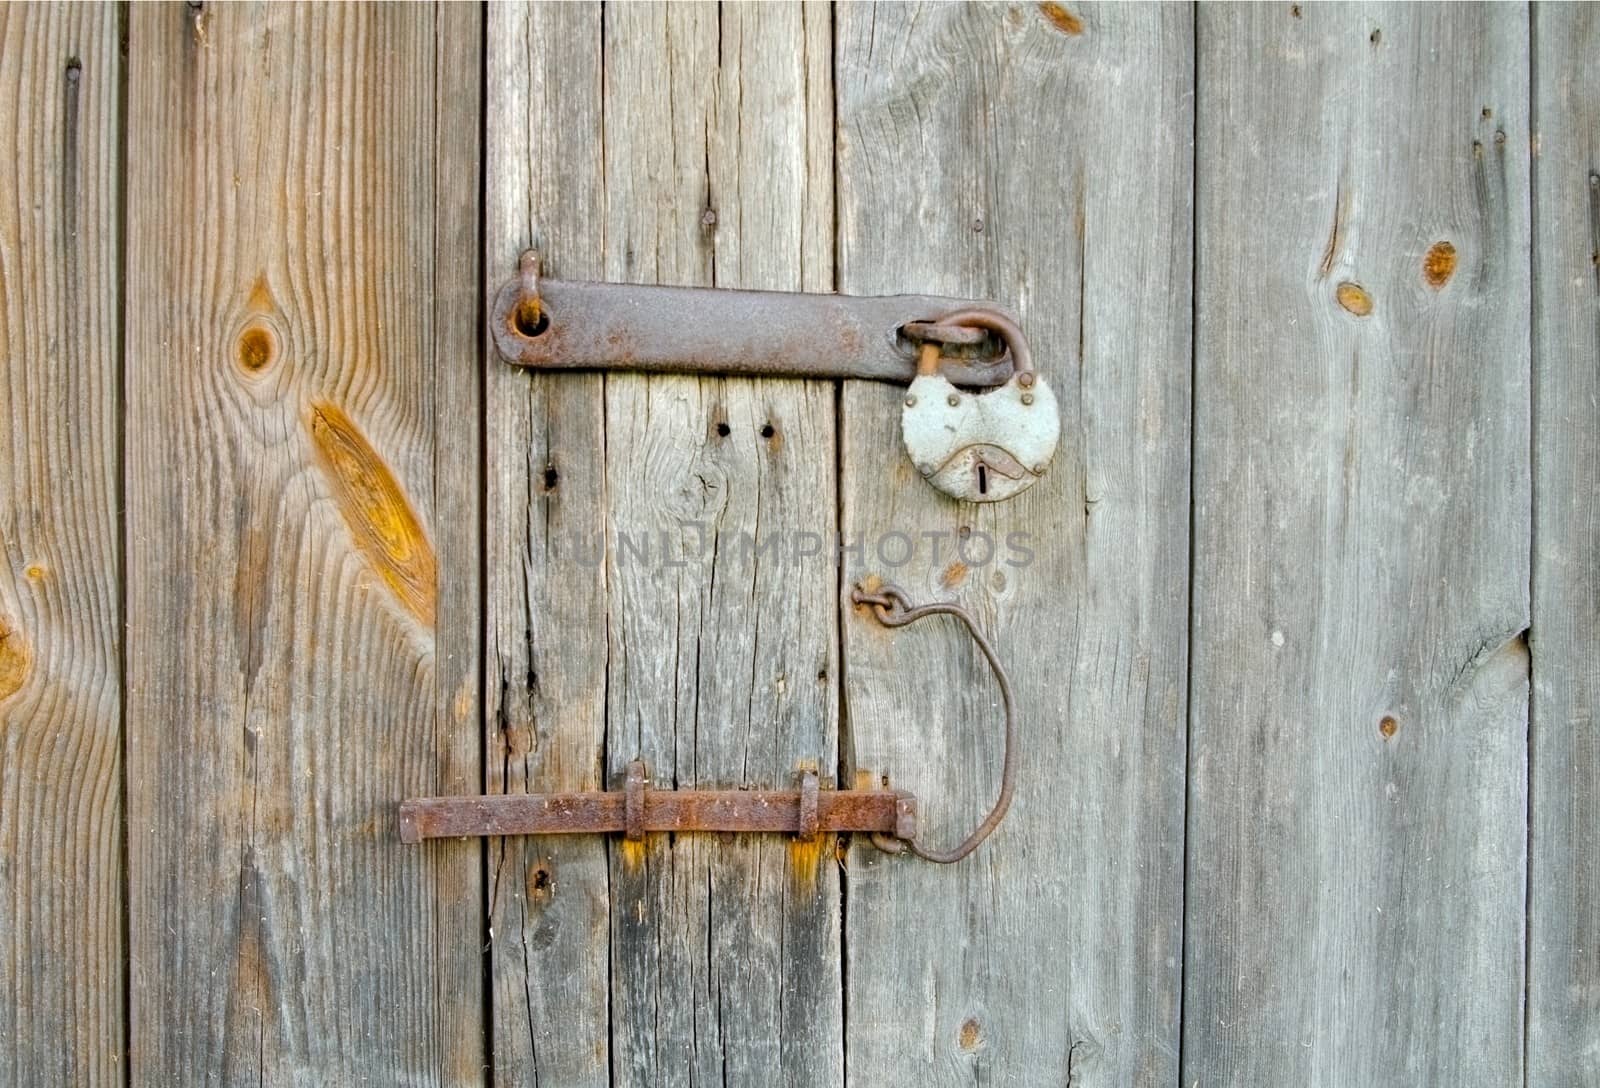 Wooden door with a rusty bolt and padlock